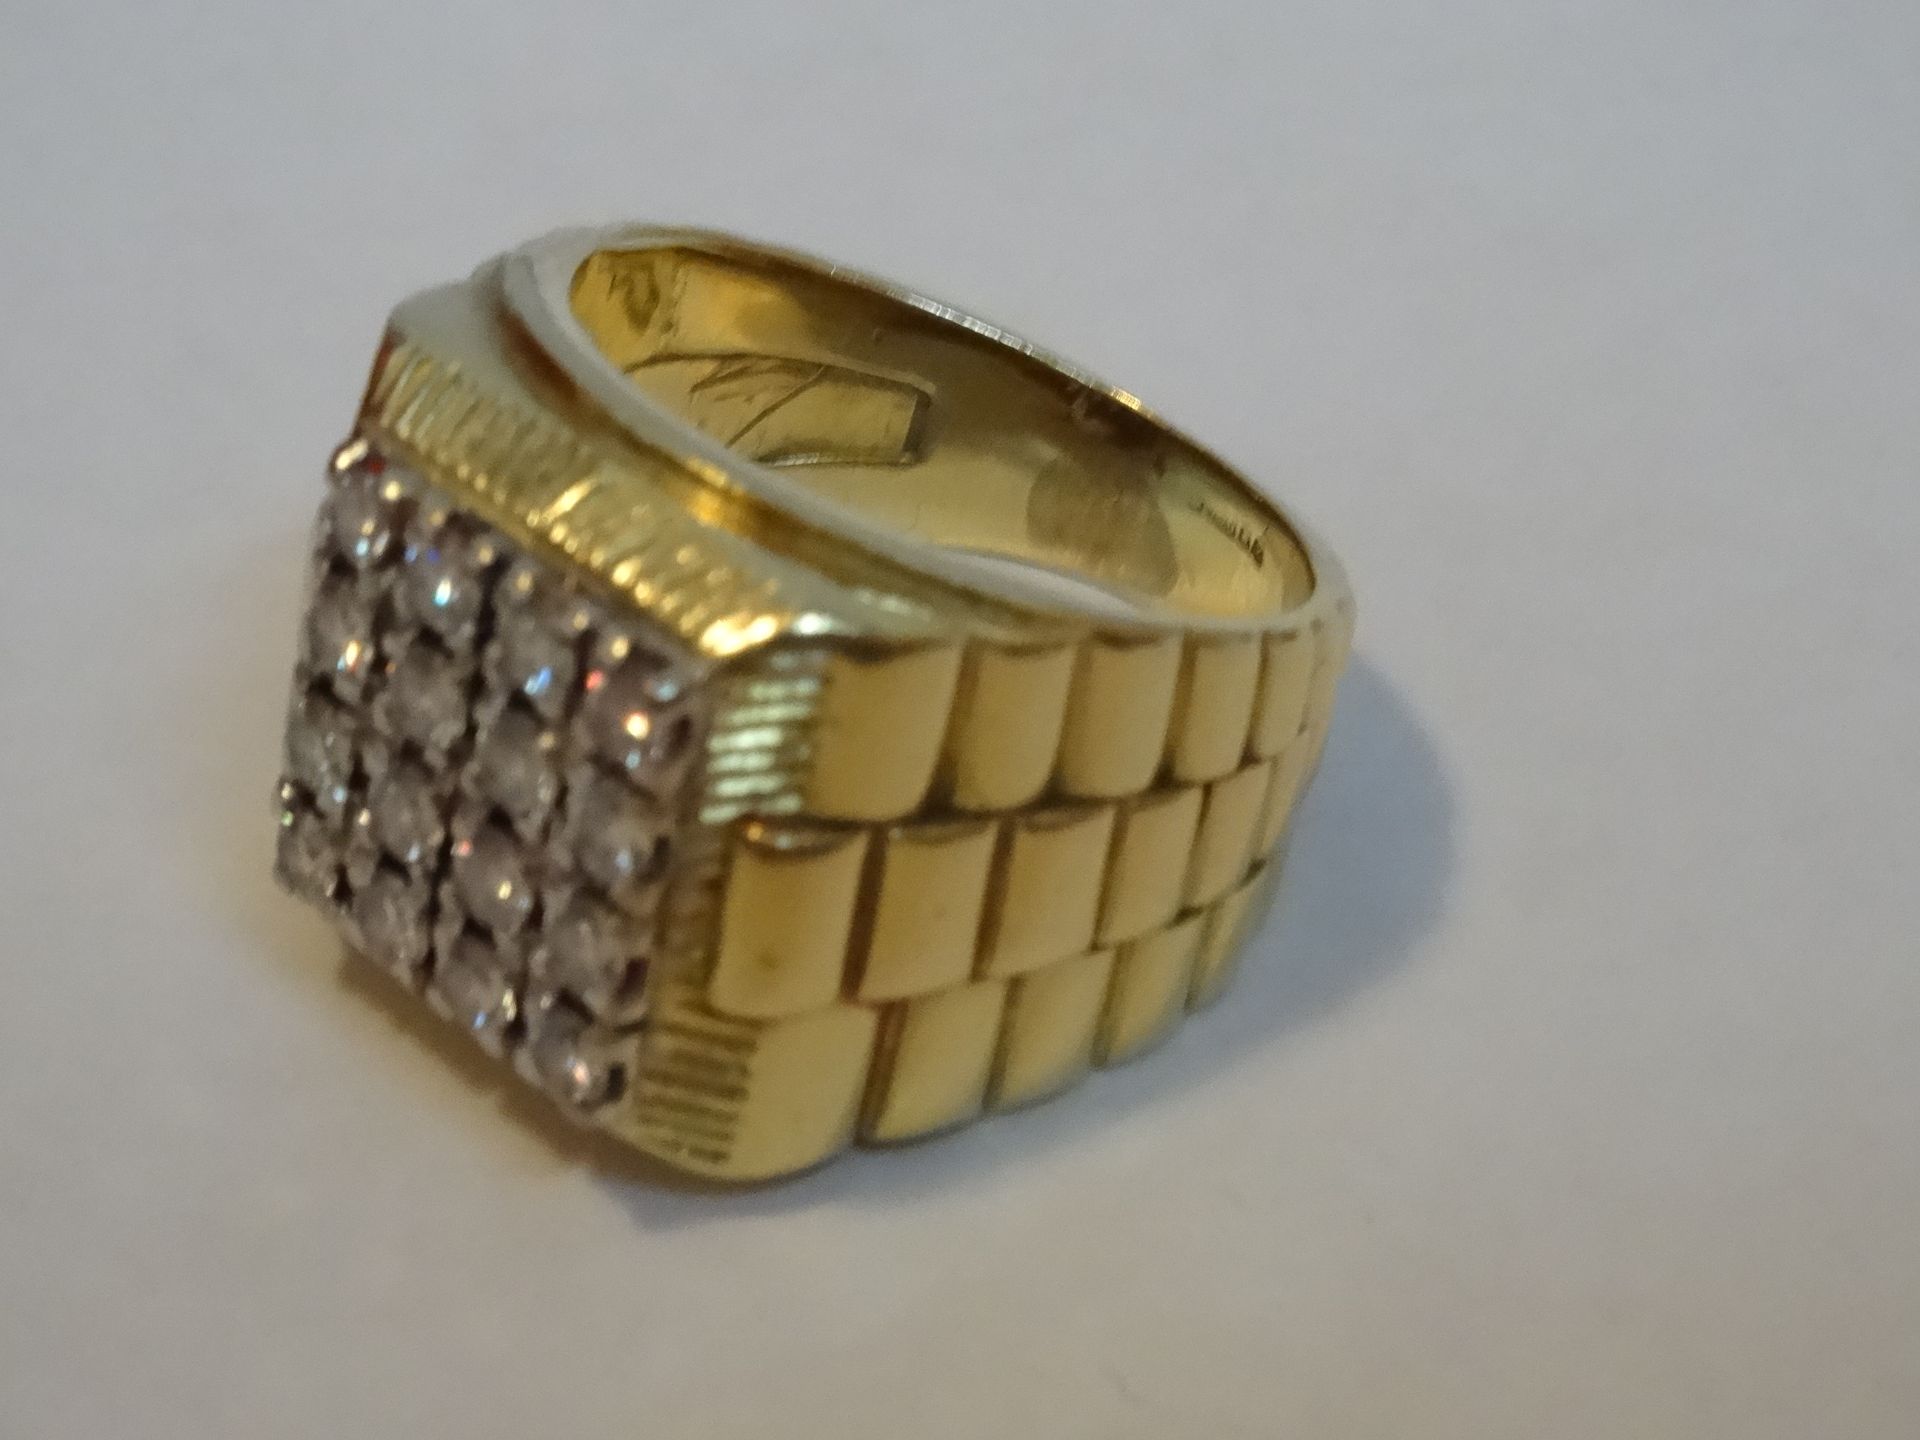 18 Carat Yellow & White Gold Gents Rolex Style Ring Containing 0.8 Carats Of Diamonds. - Image 6 of 6